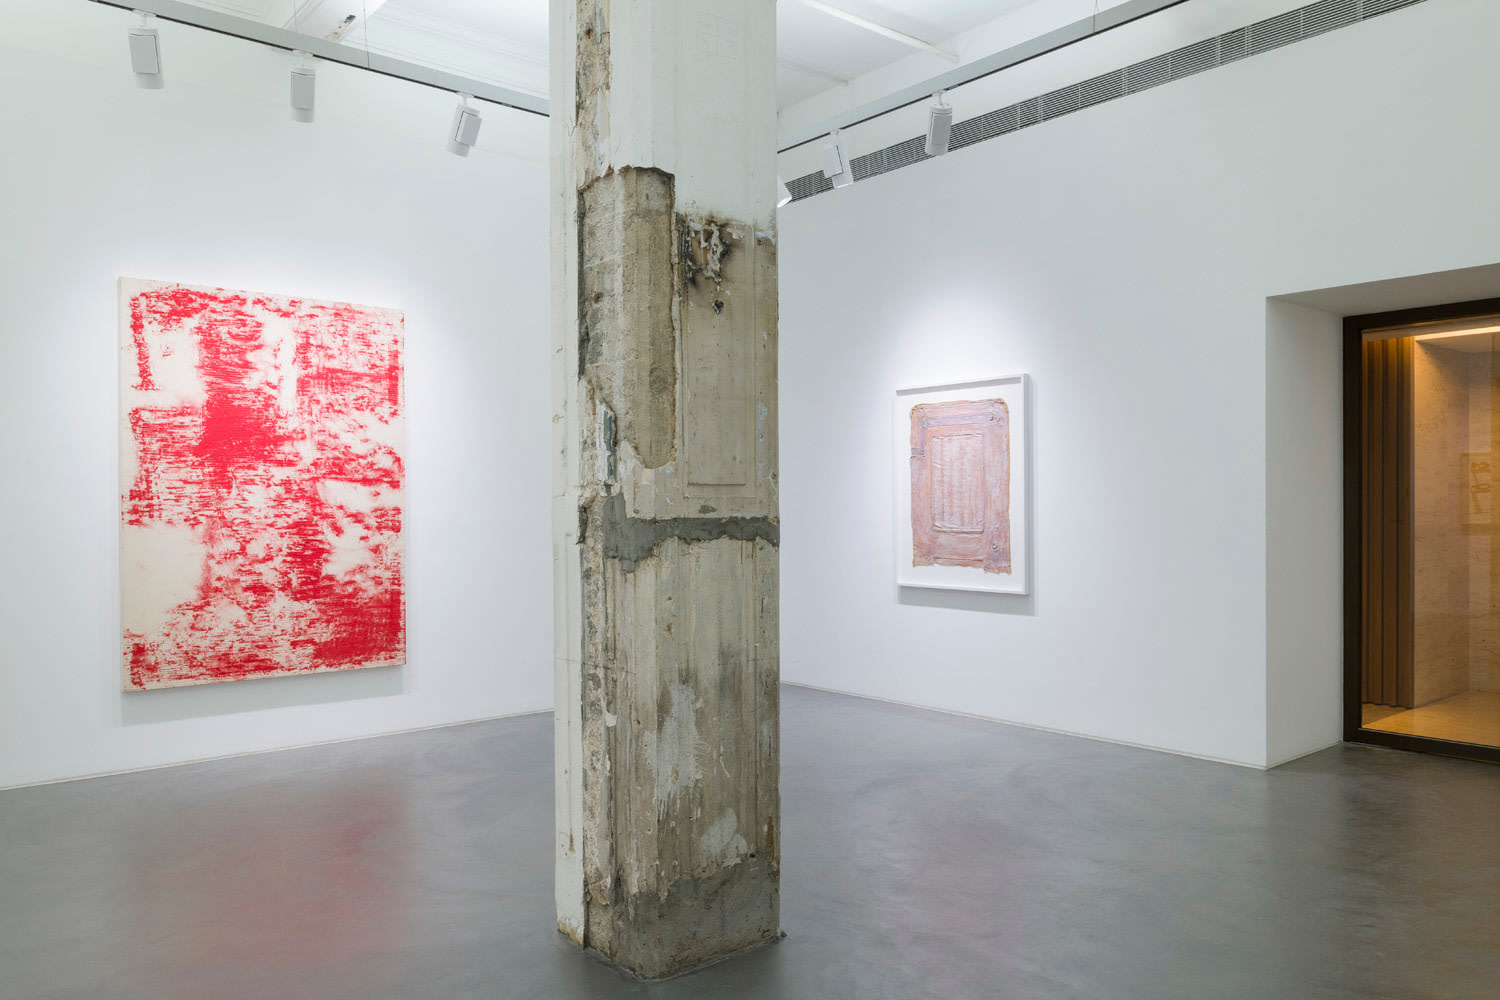 Third installation view of the group exhibition be/longing at Lehmann Maupin Hong Kong